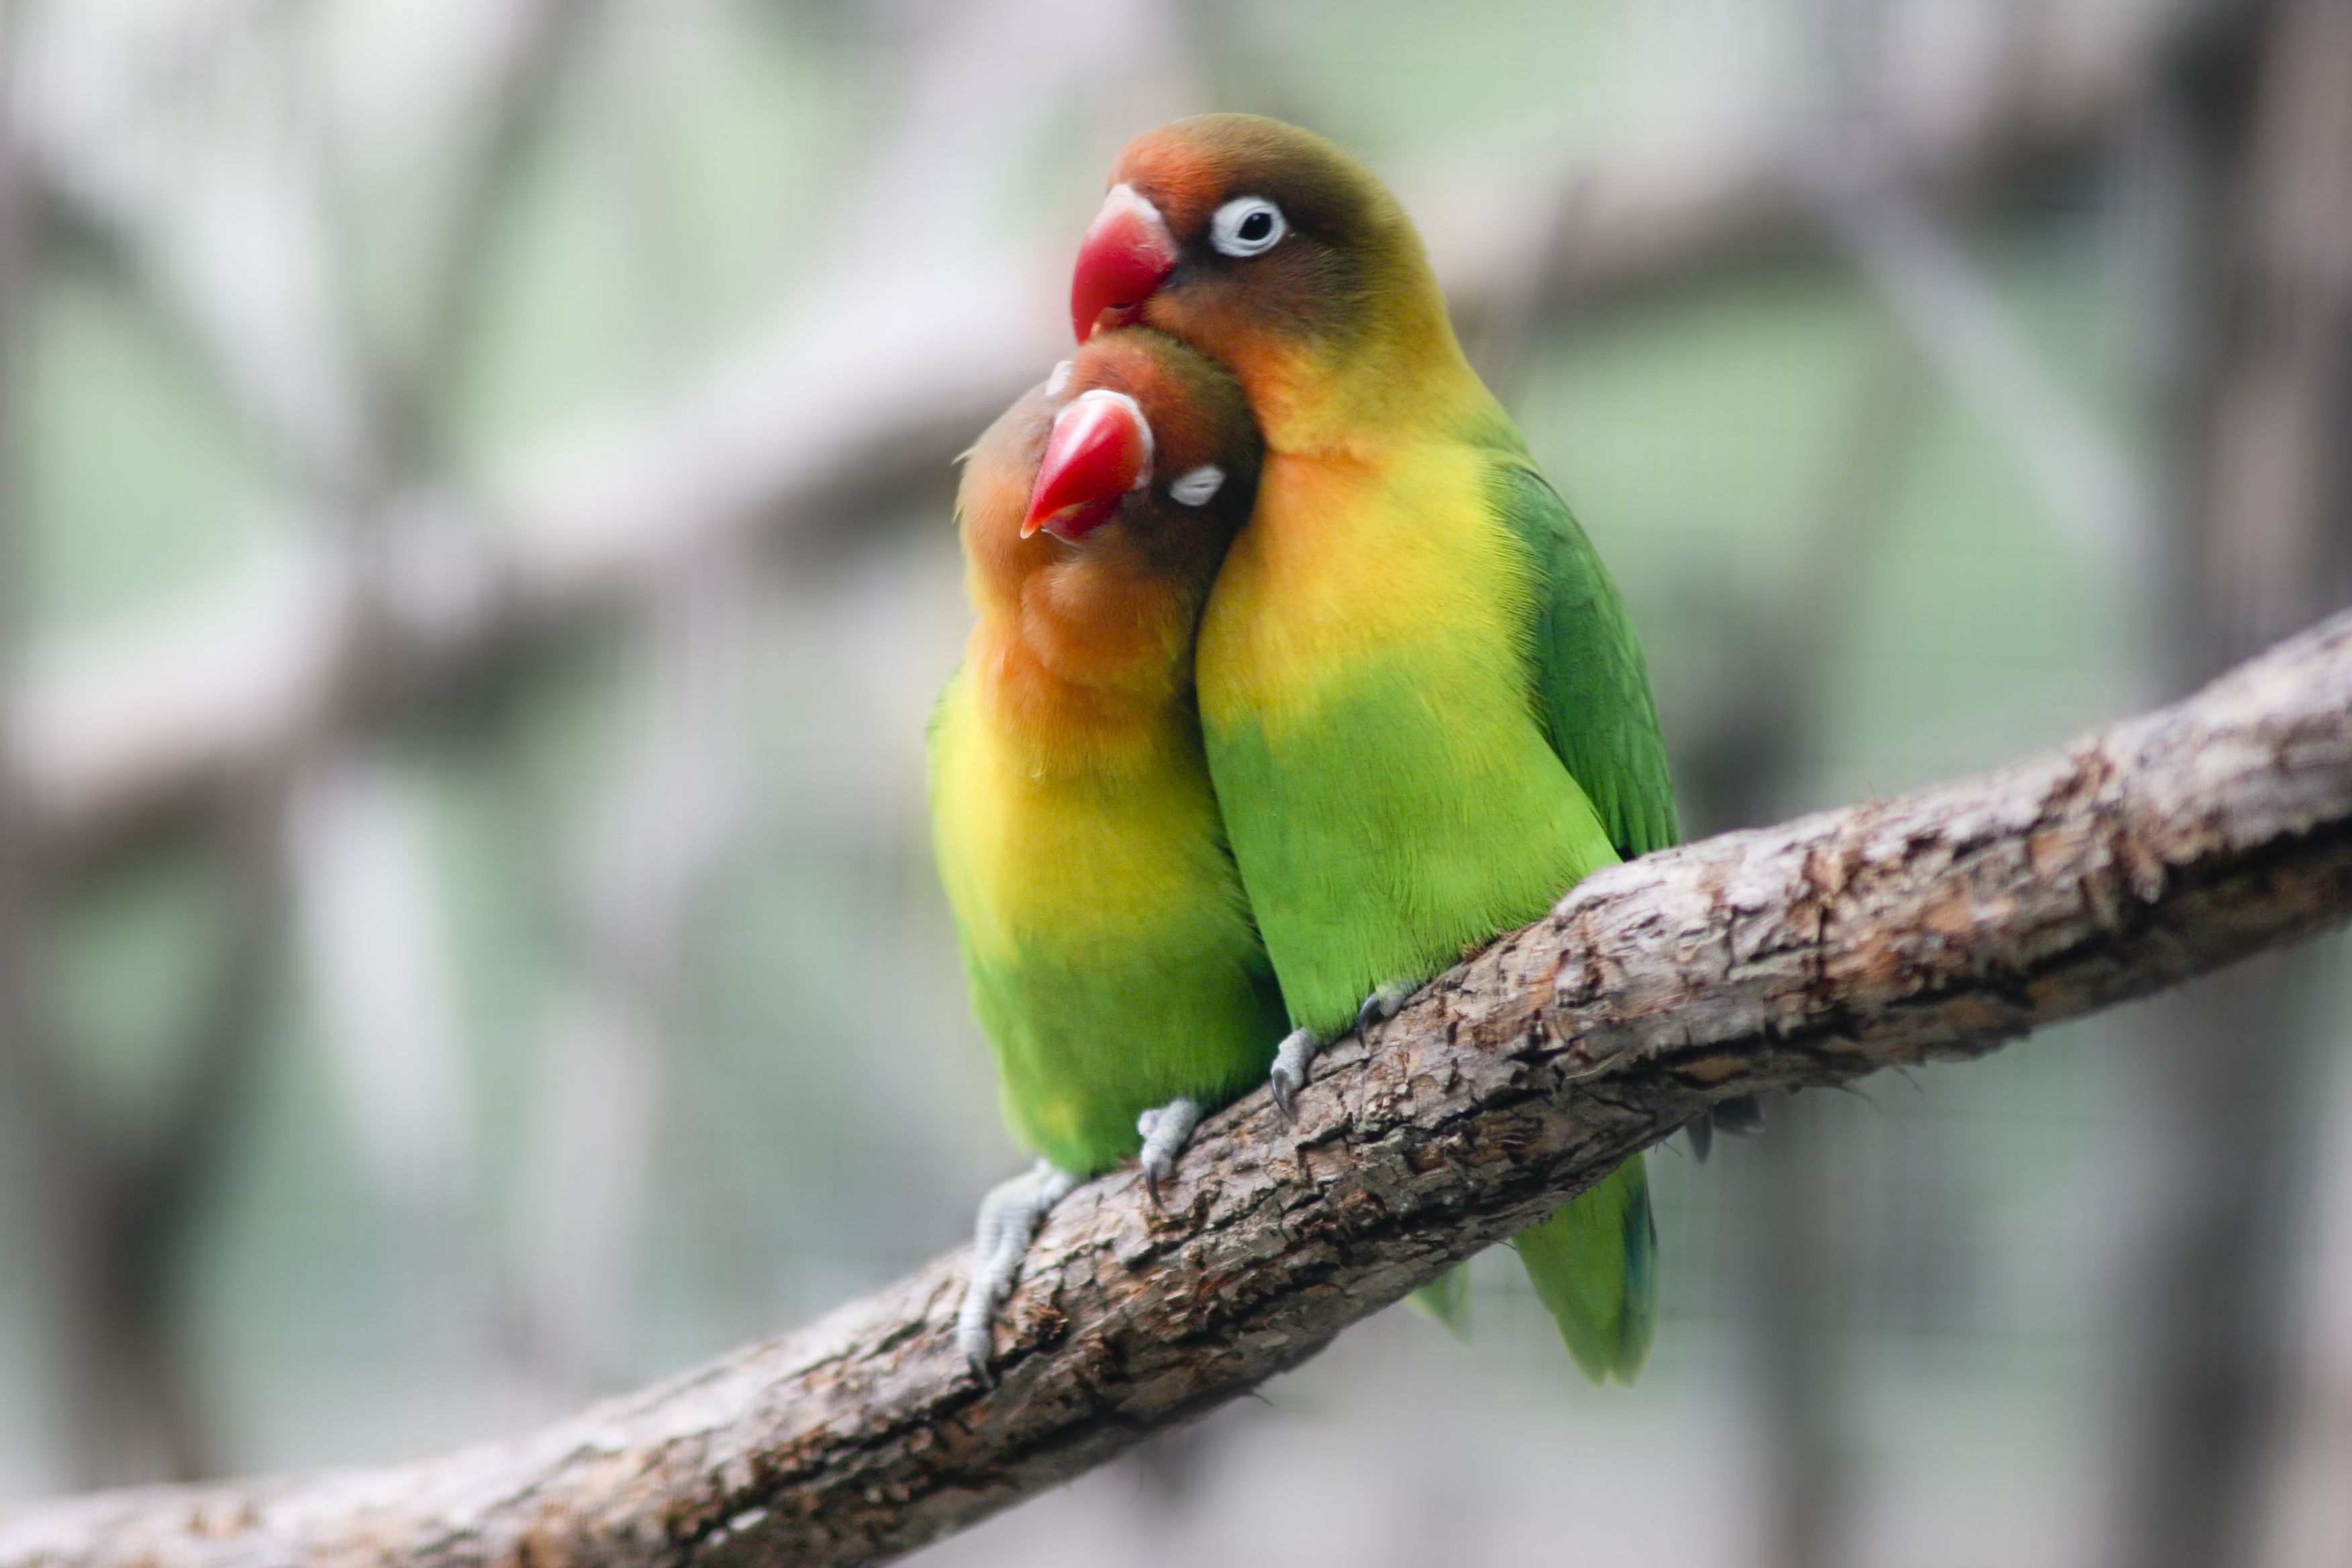 What Can Lovebirds Eat? - Maintaining Good Health Tips